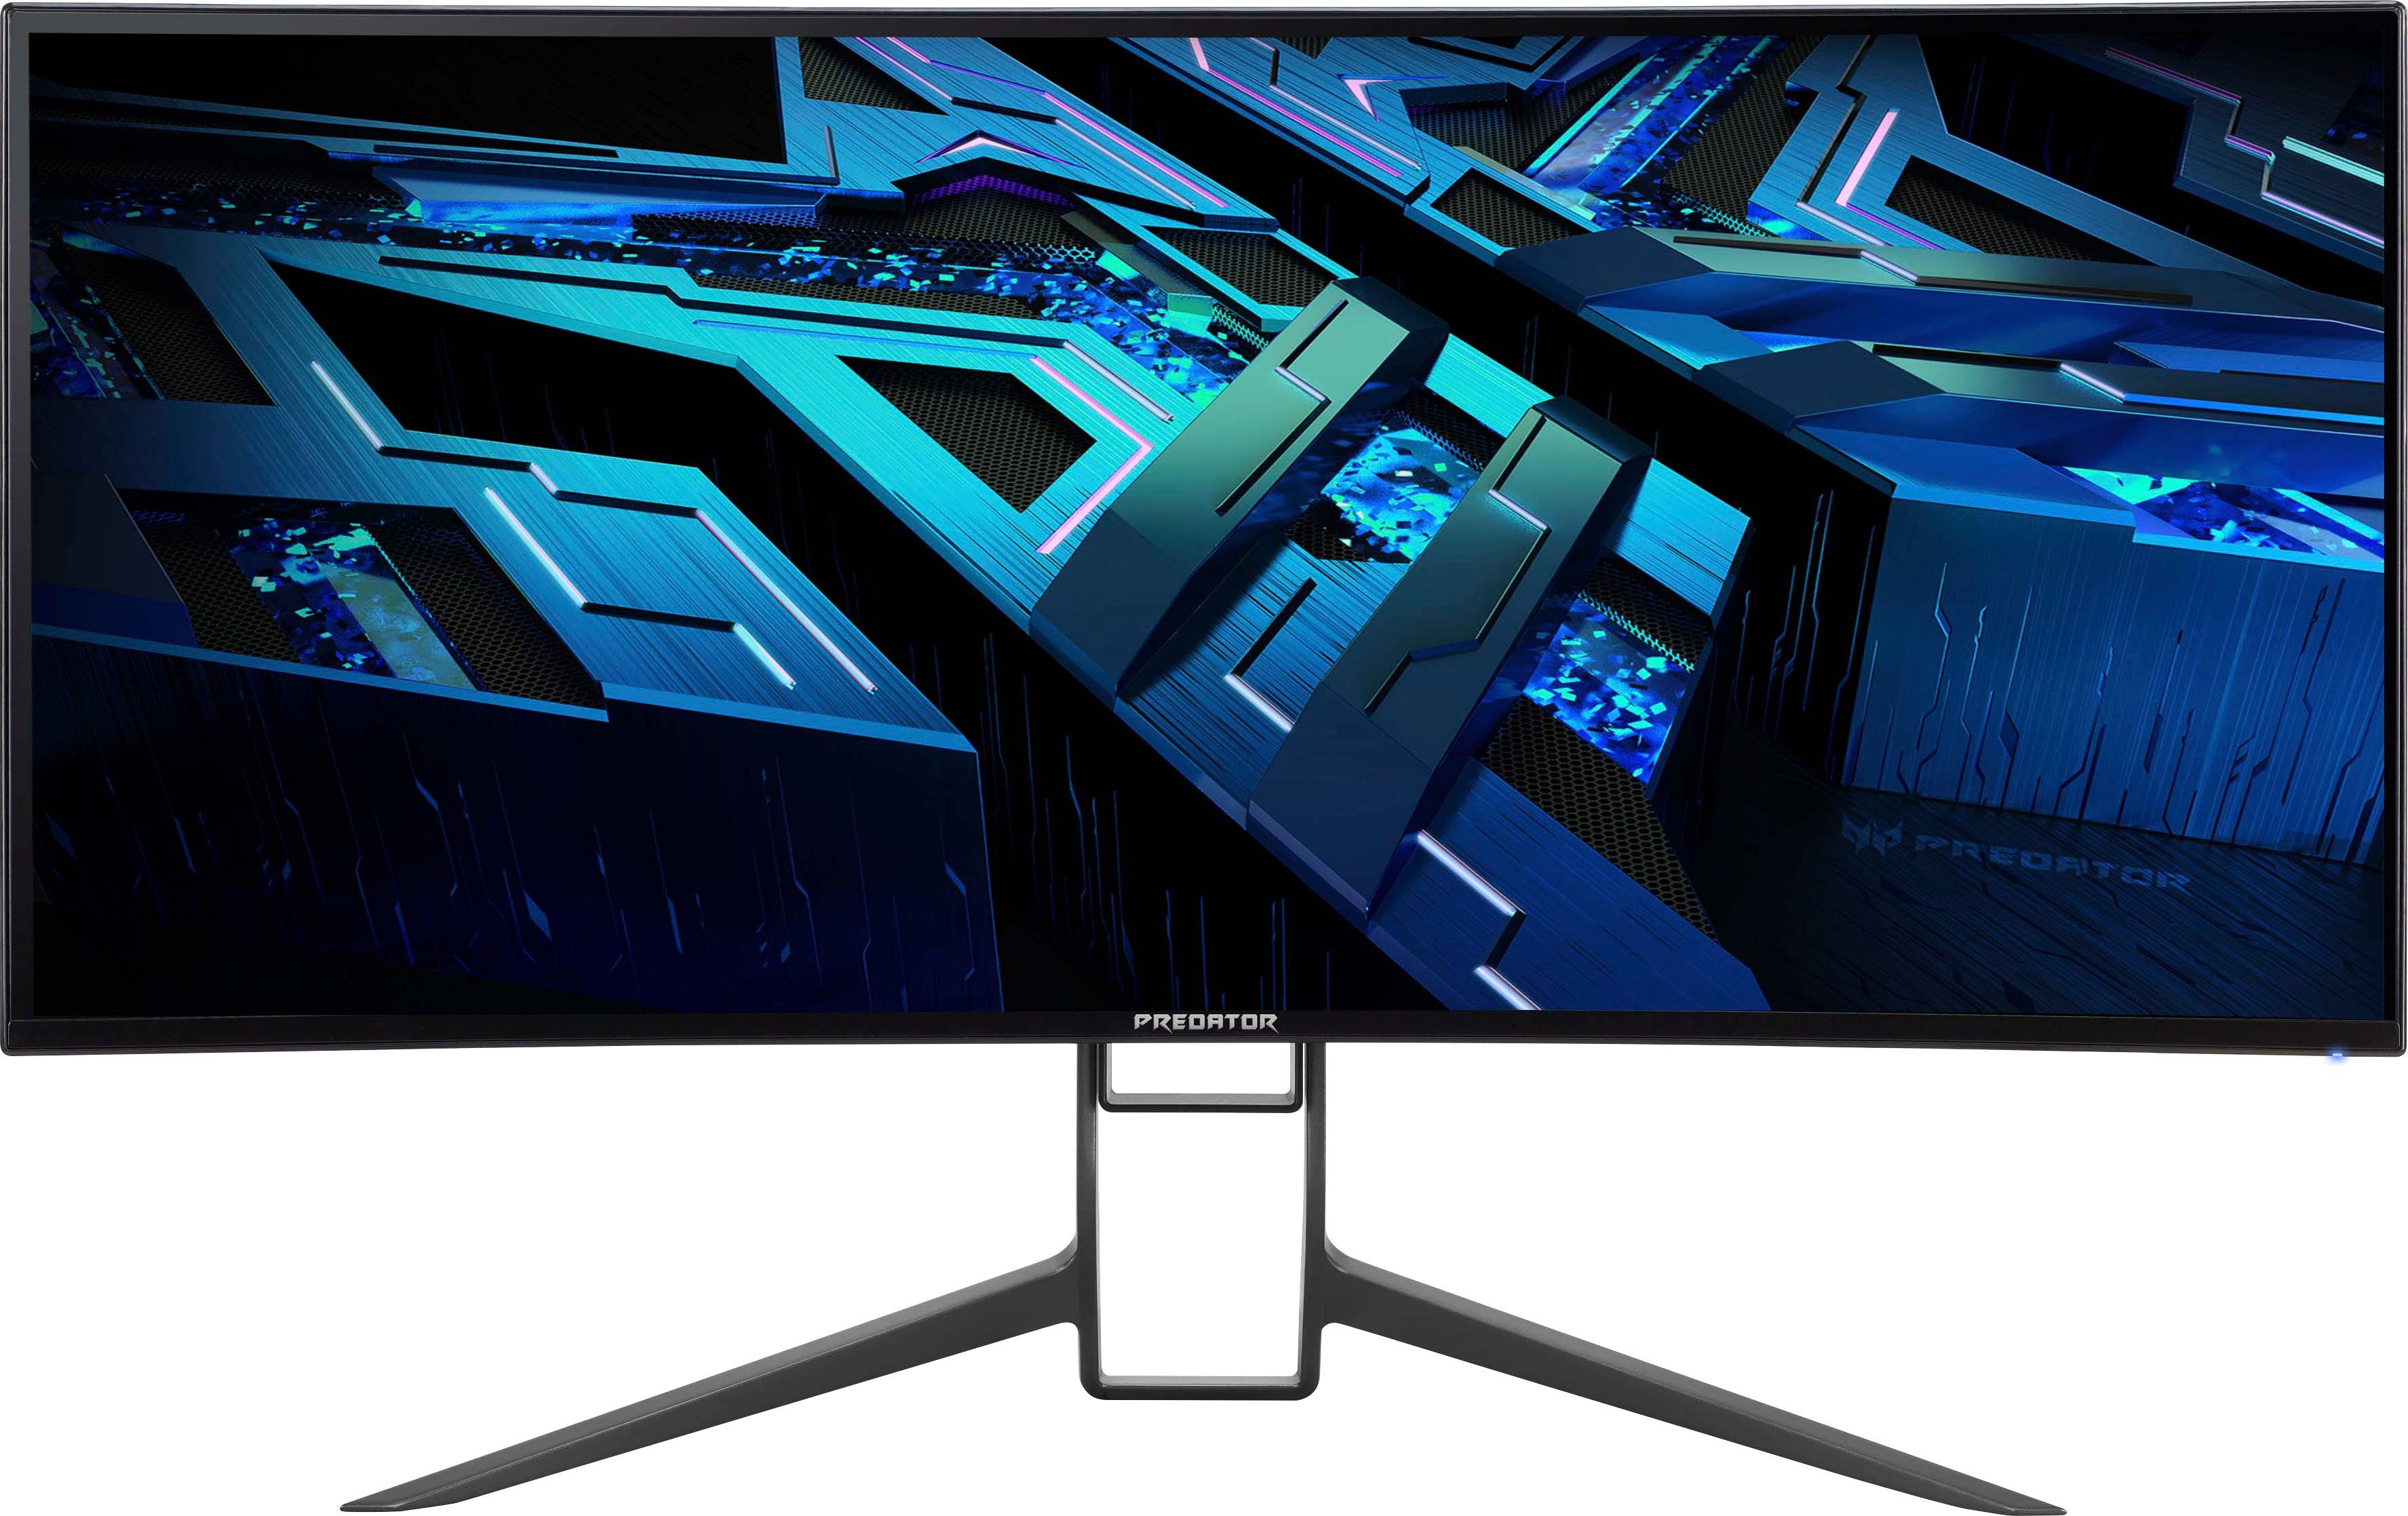 Acer Predator ", Curved-Gaming-LED-Monitor cm/34 (86,4 px, IPS-LED) 180 Hz, ms X34GS 1440 0,5 Reaktionszeit, x 3440